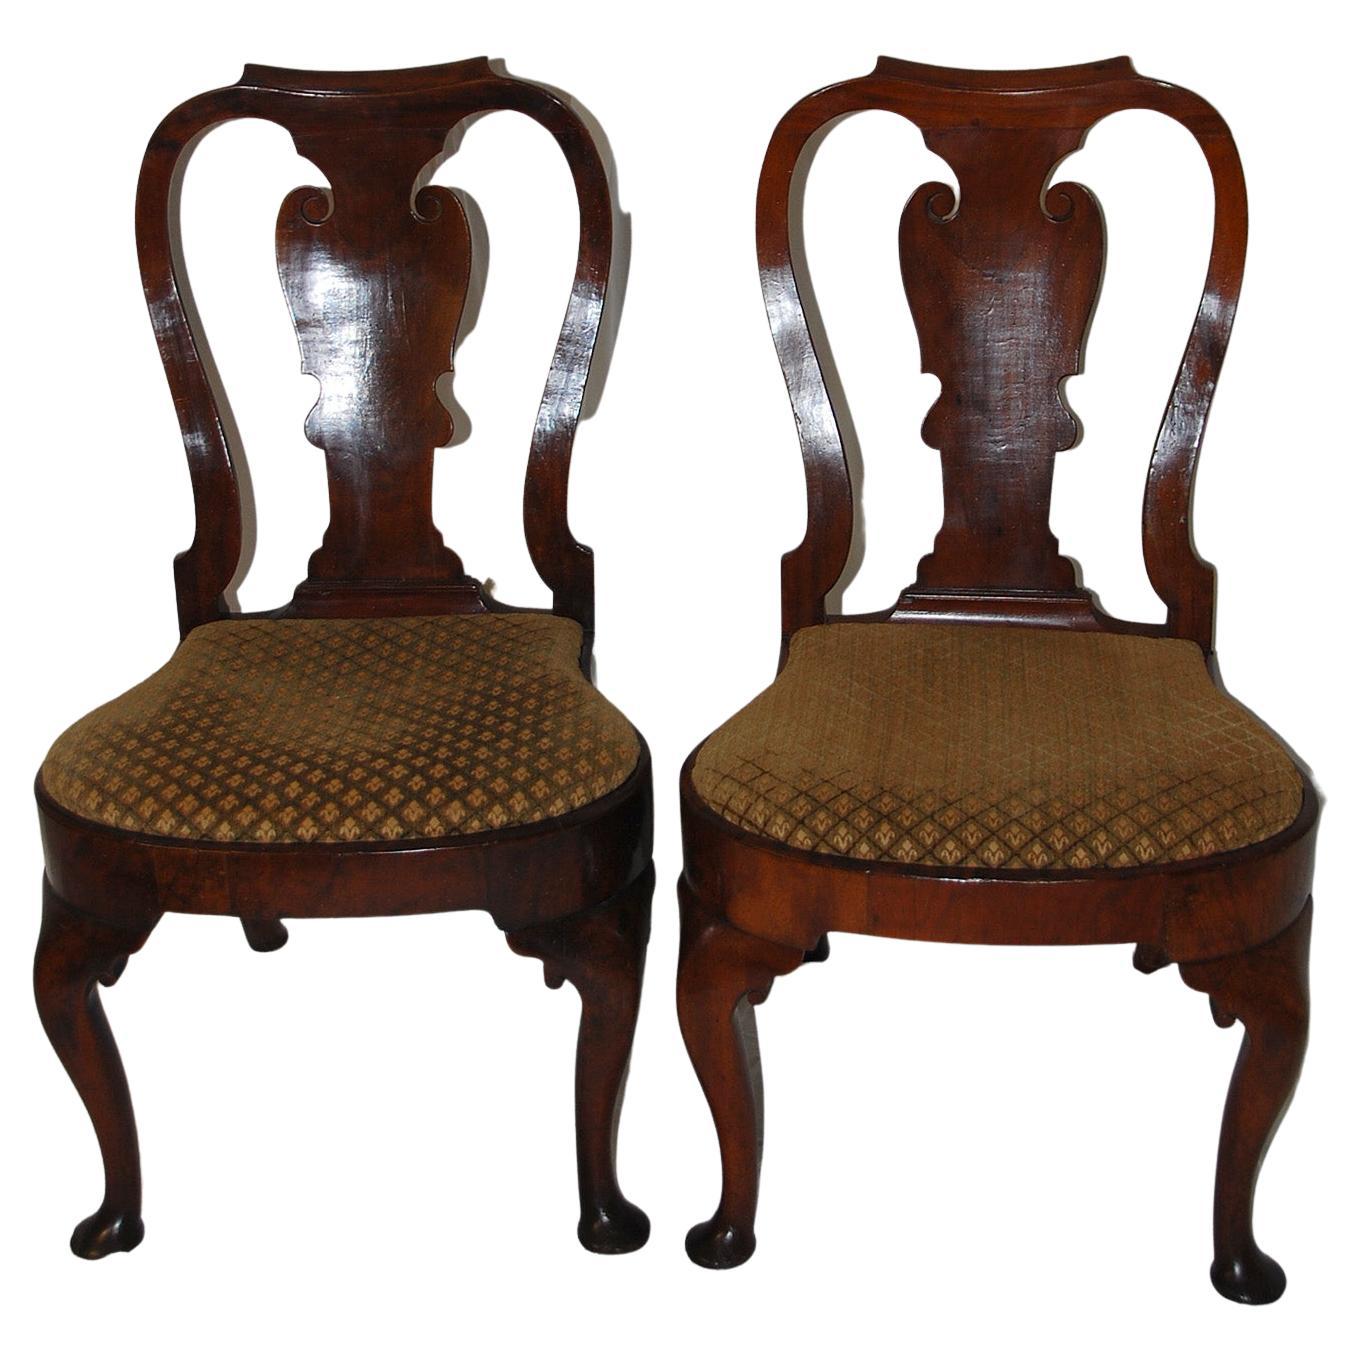 English Queen Anne Period 18th Century Walnut Pair of Balloon Seated Sidechairs For Sale